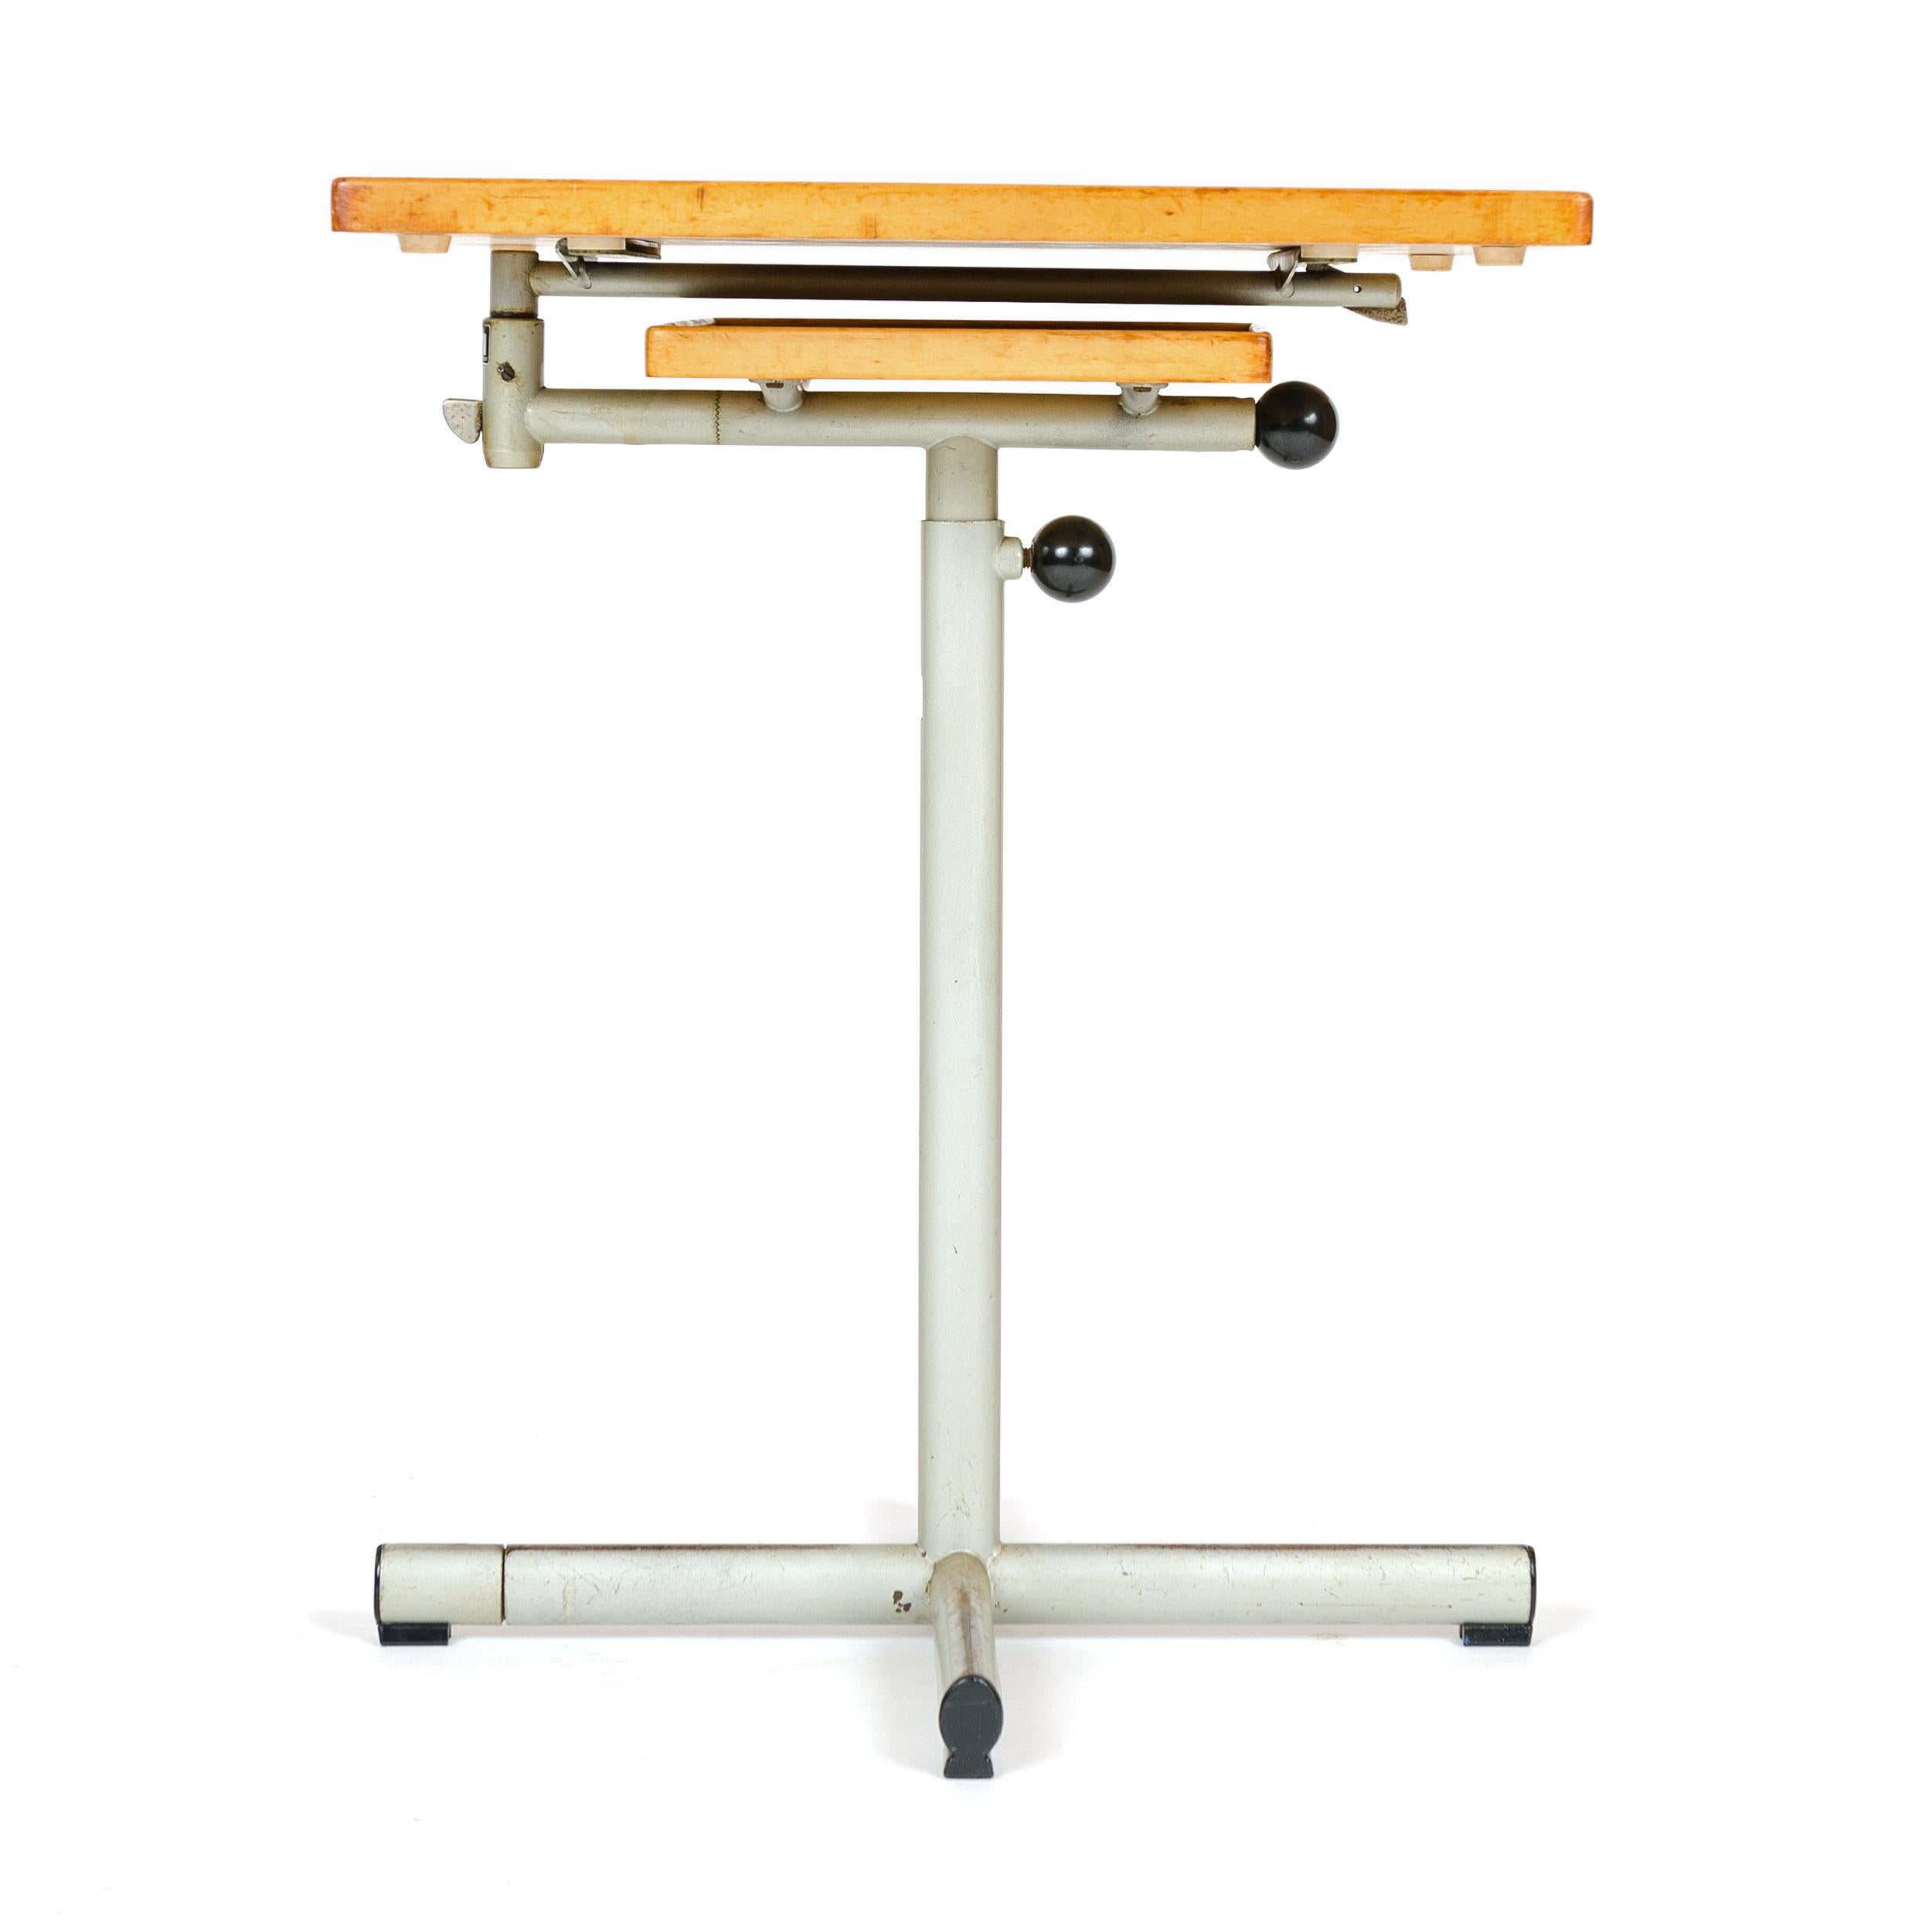 A beautifully engineered utility tray table or workstation with a copper plated steel base and a bakelite handle. The upper surface swings around has a 90º tilt and adjusts to 26